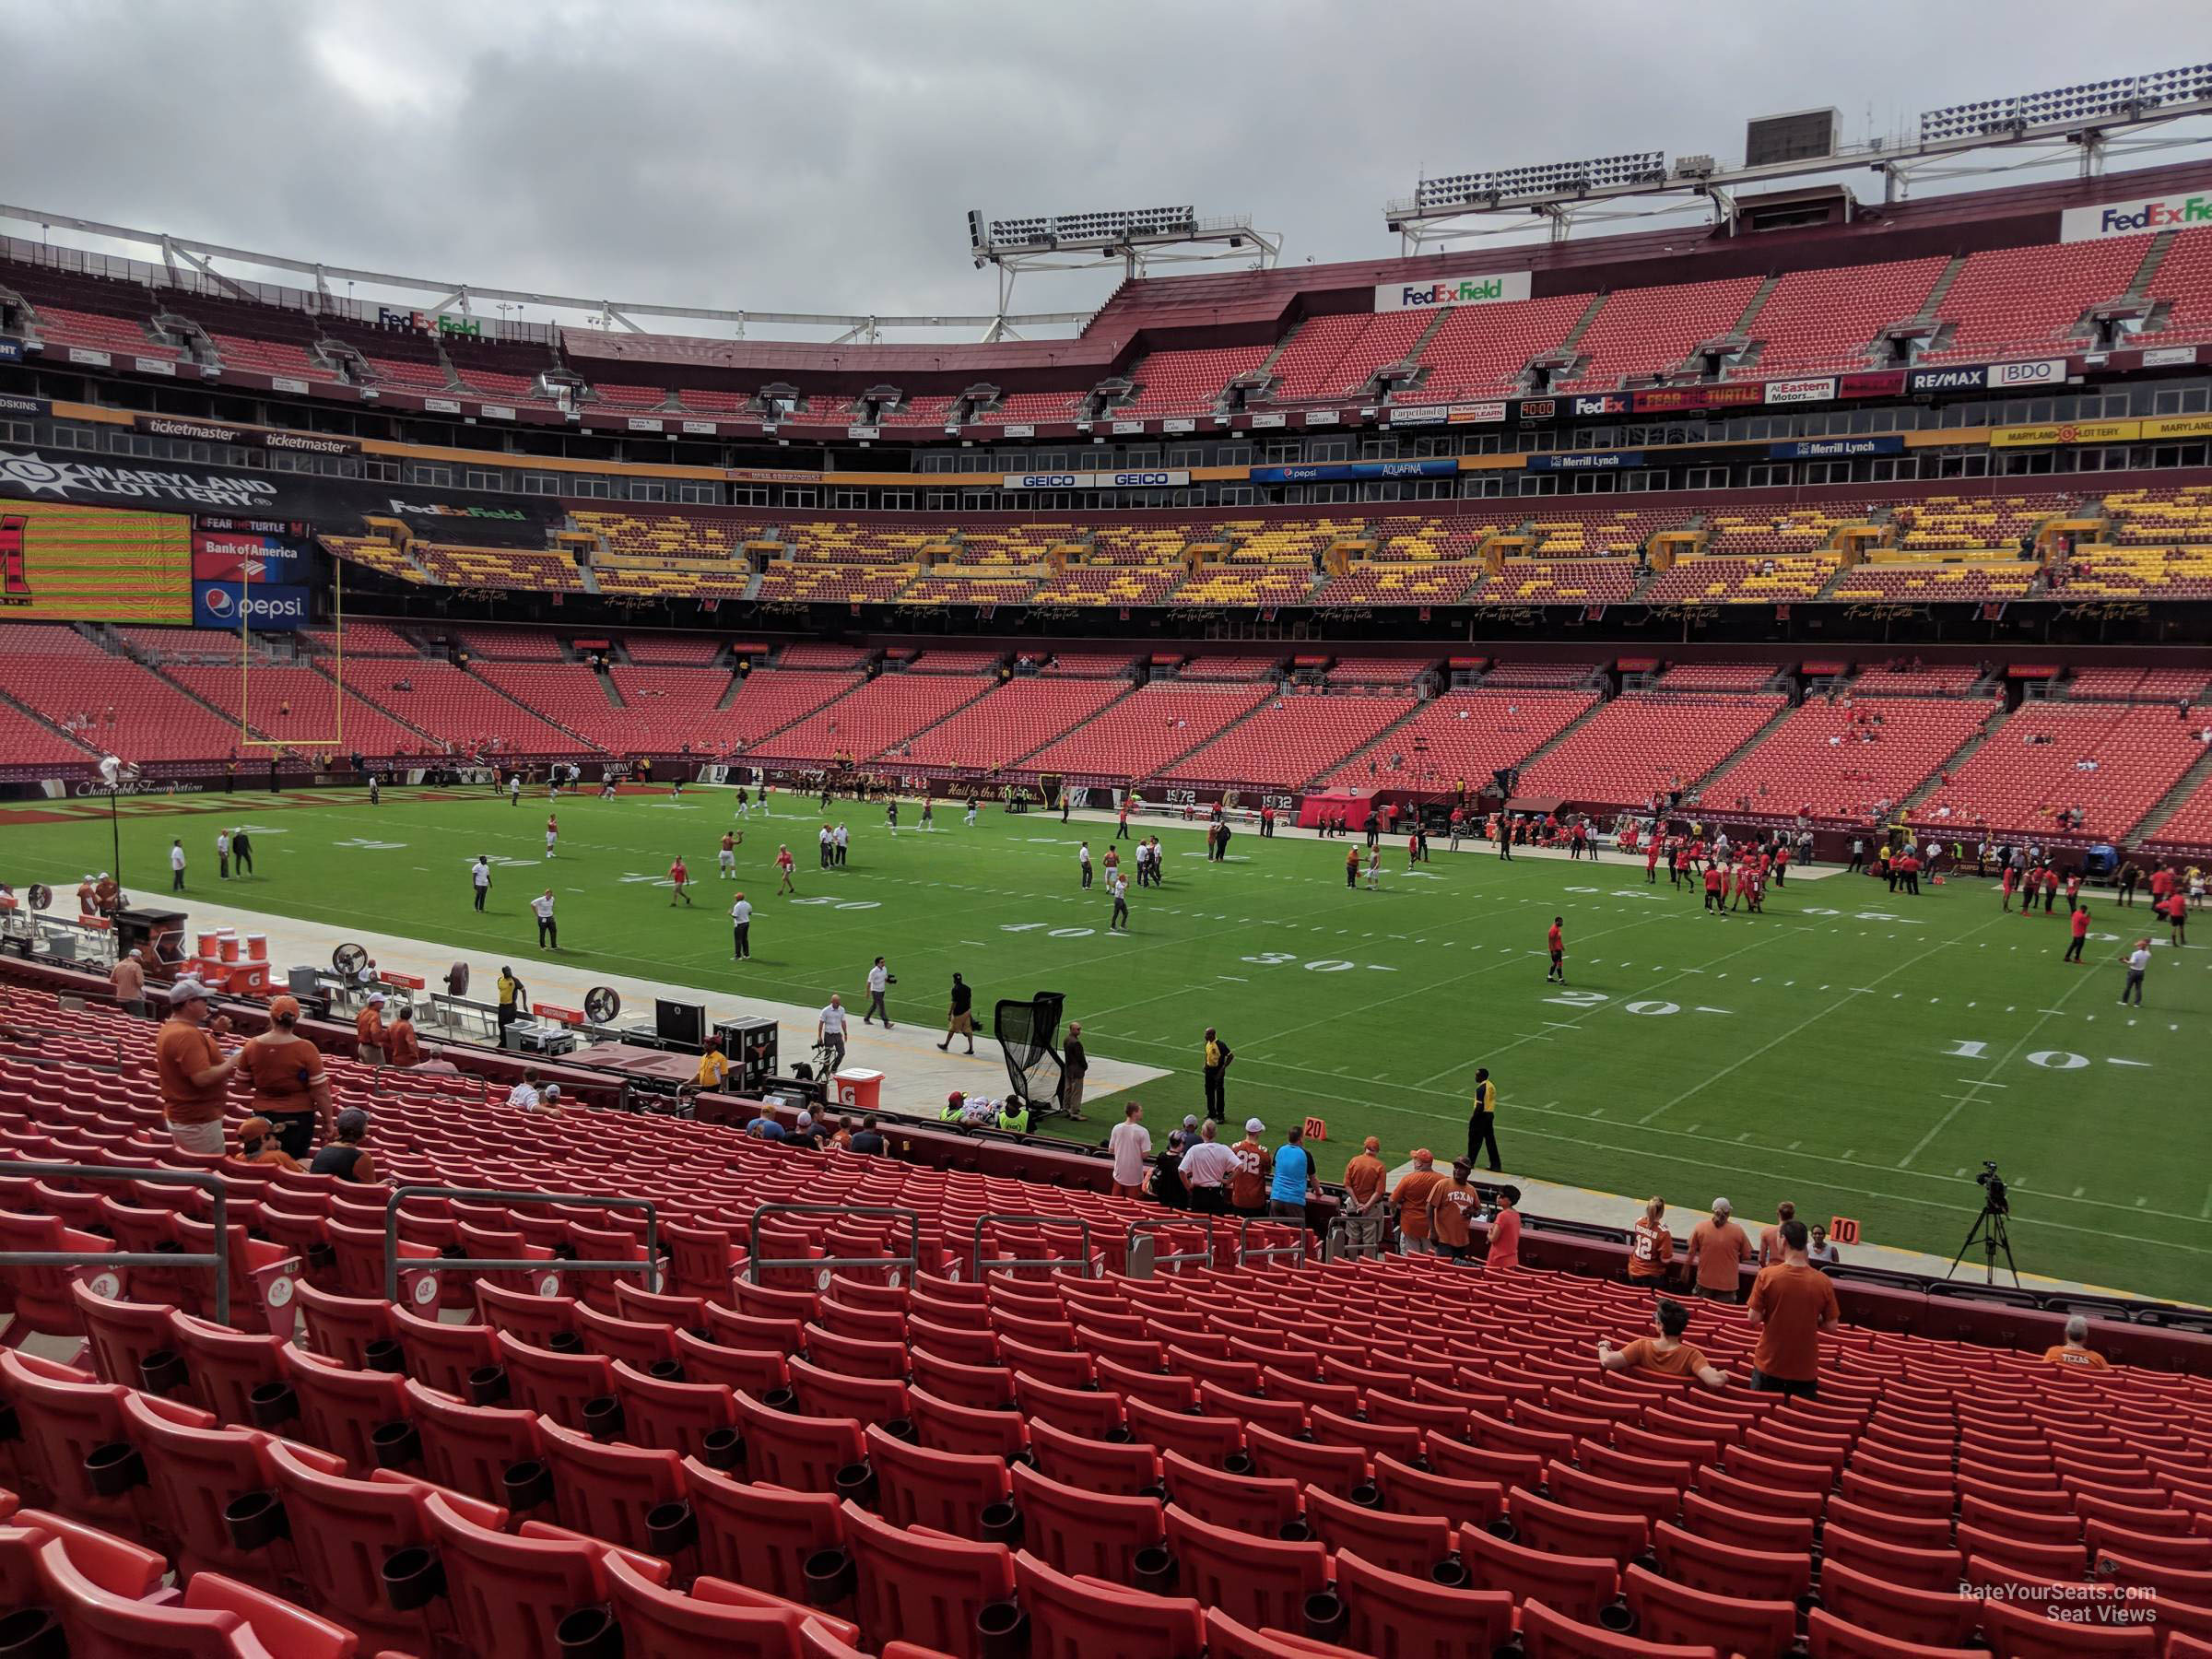 section 118, row 25 seat view  - fedexfield